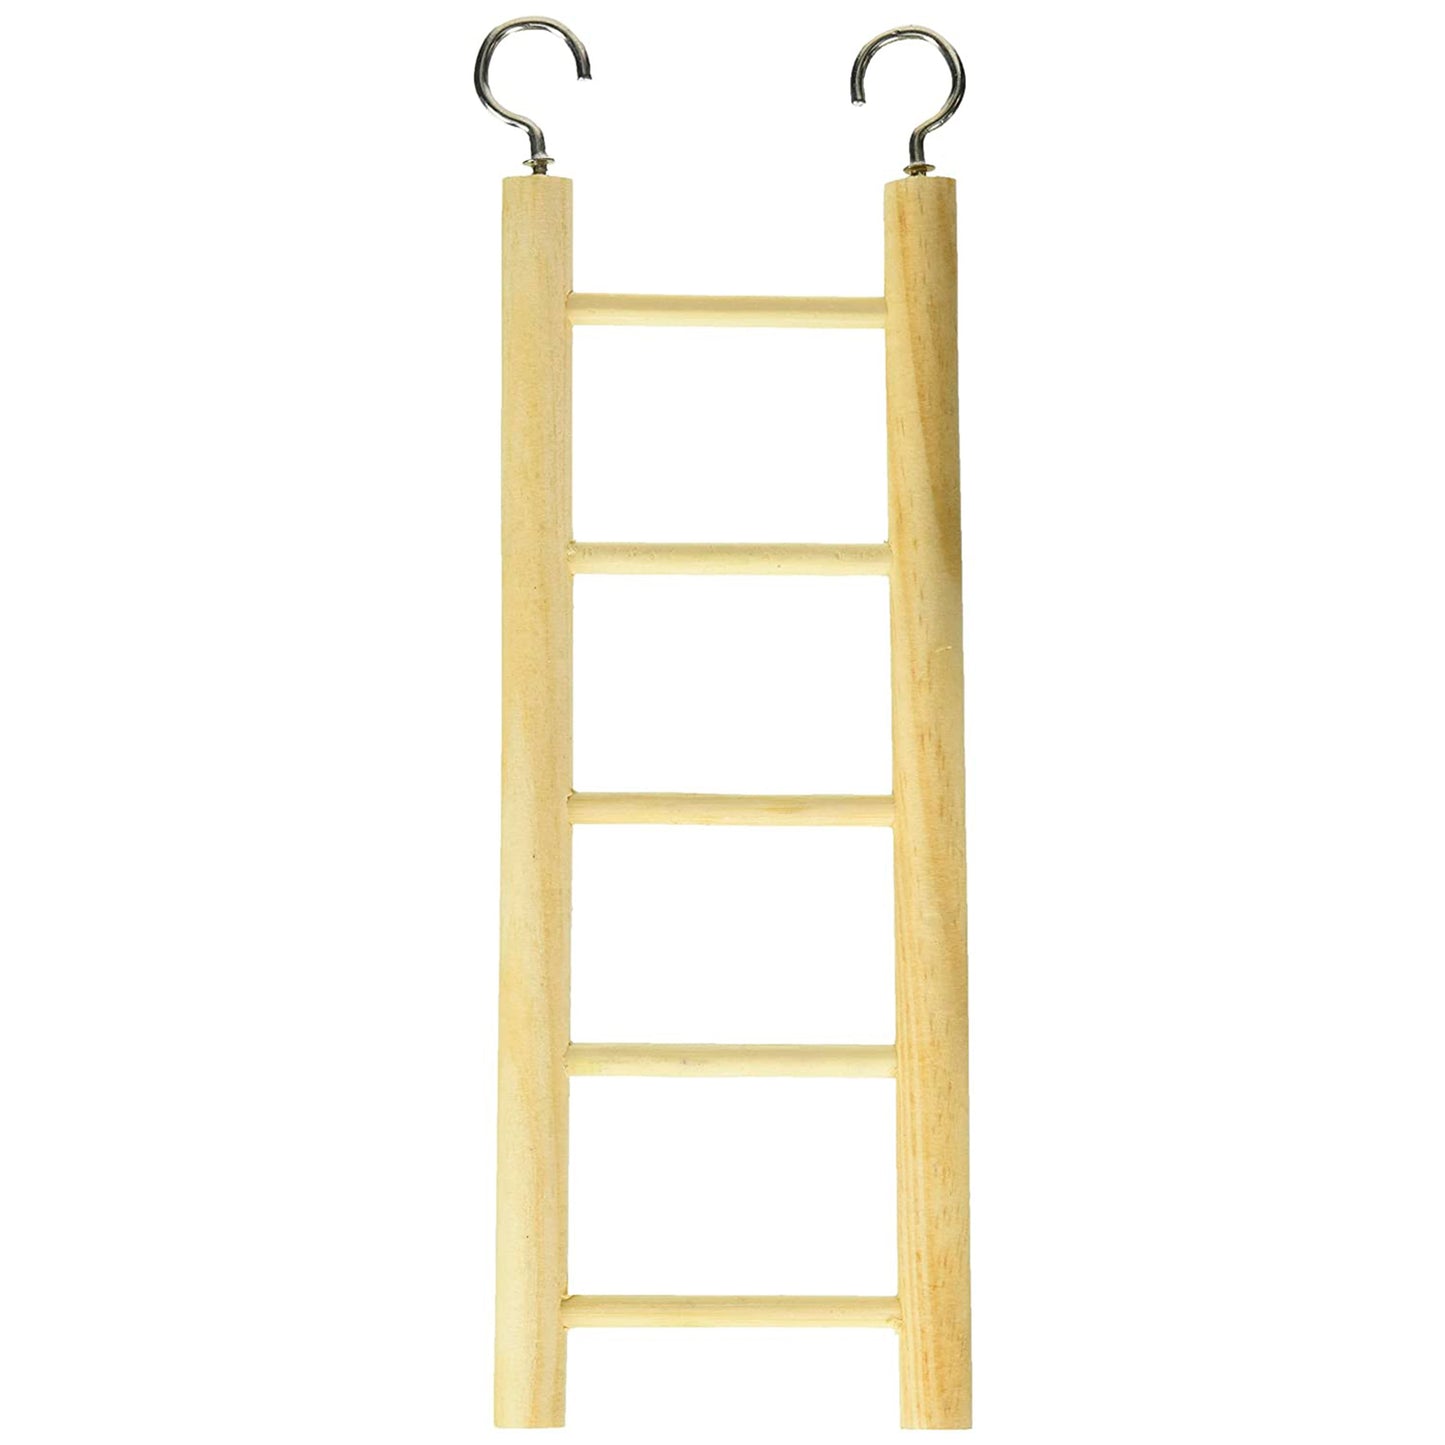 Prevue Pet Products Birdie Basics 5-Rung Ladder Unvarnished Hardwood 2.88 in X 8 in, Prevue Pet Products